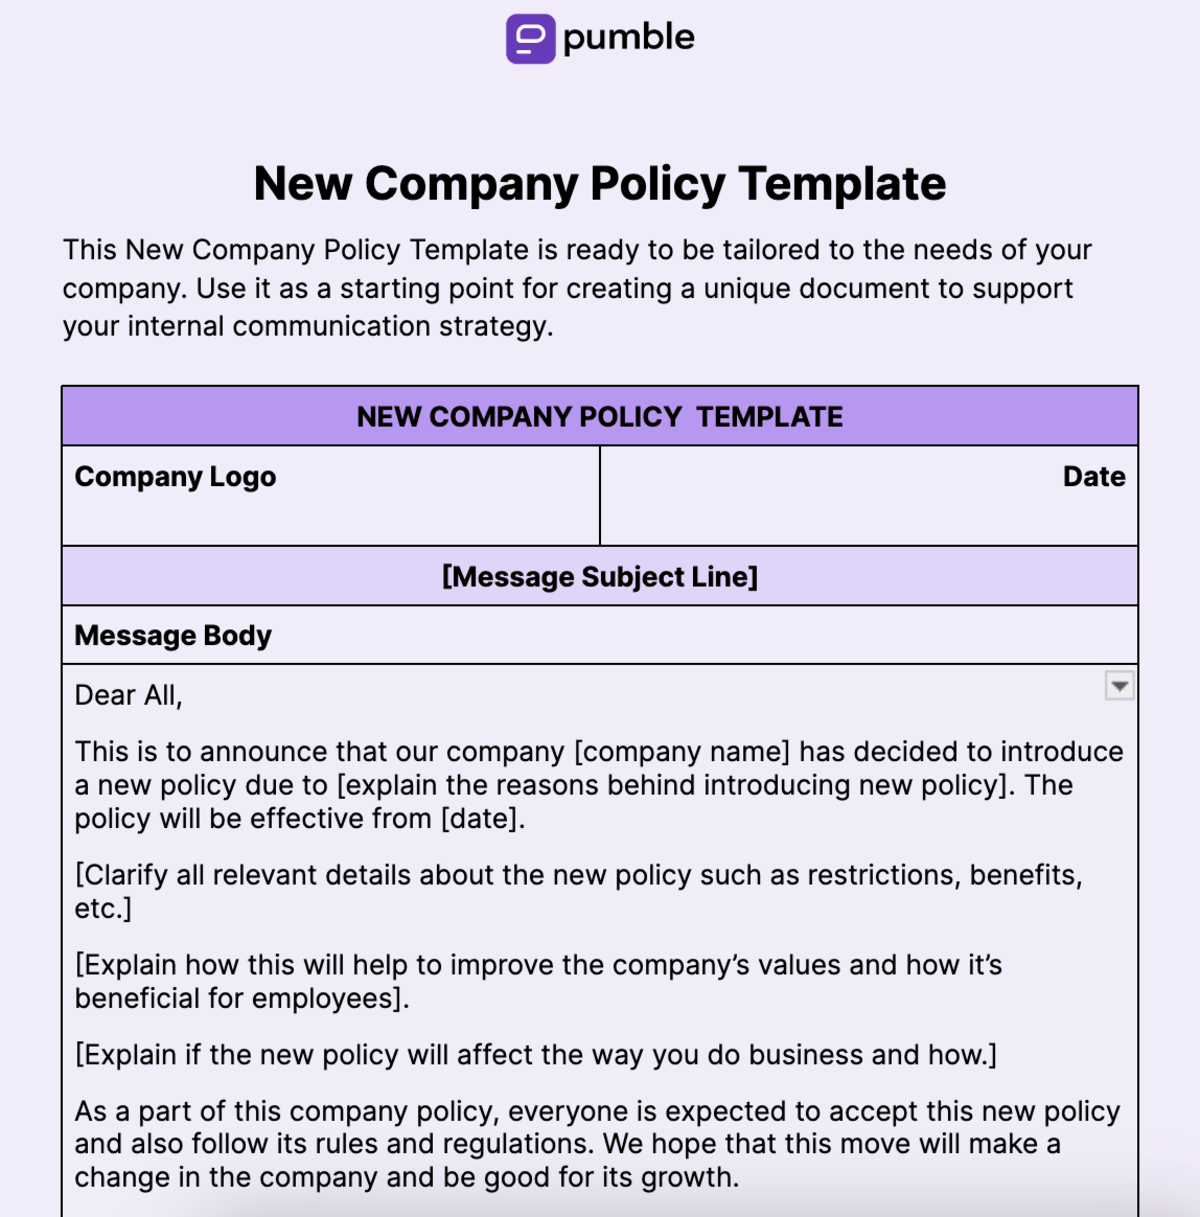 New Company Policy Template